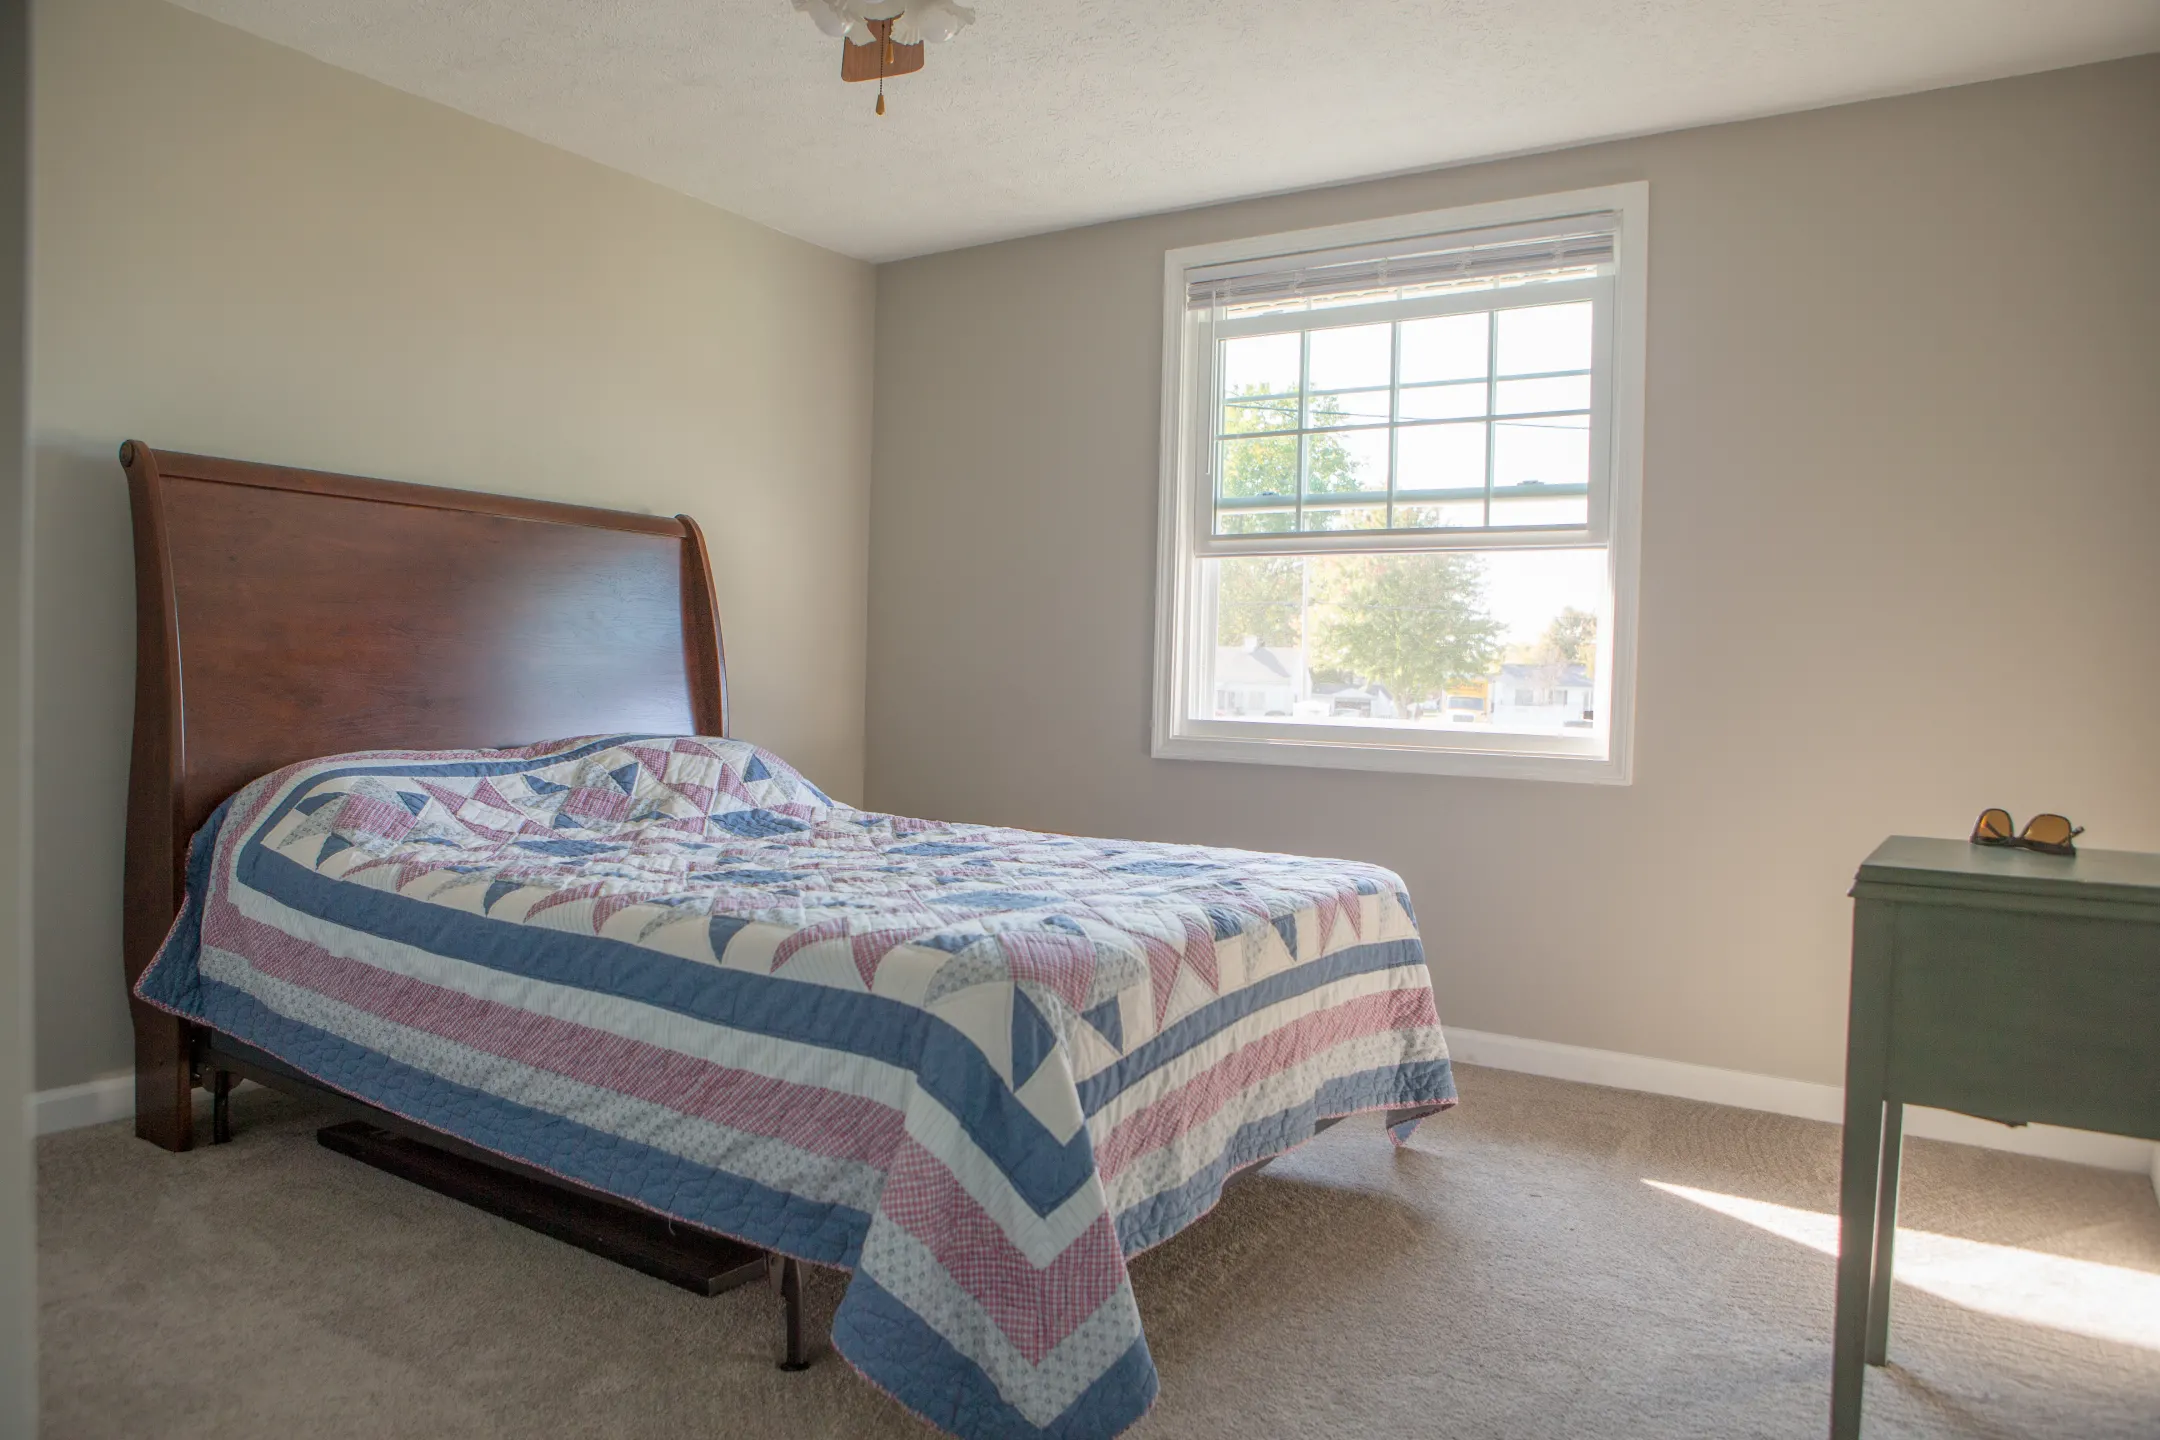 Bedroom - Meadowood Apartments - Flatwoods, KY